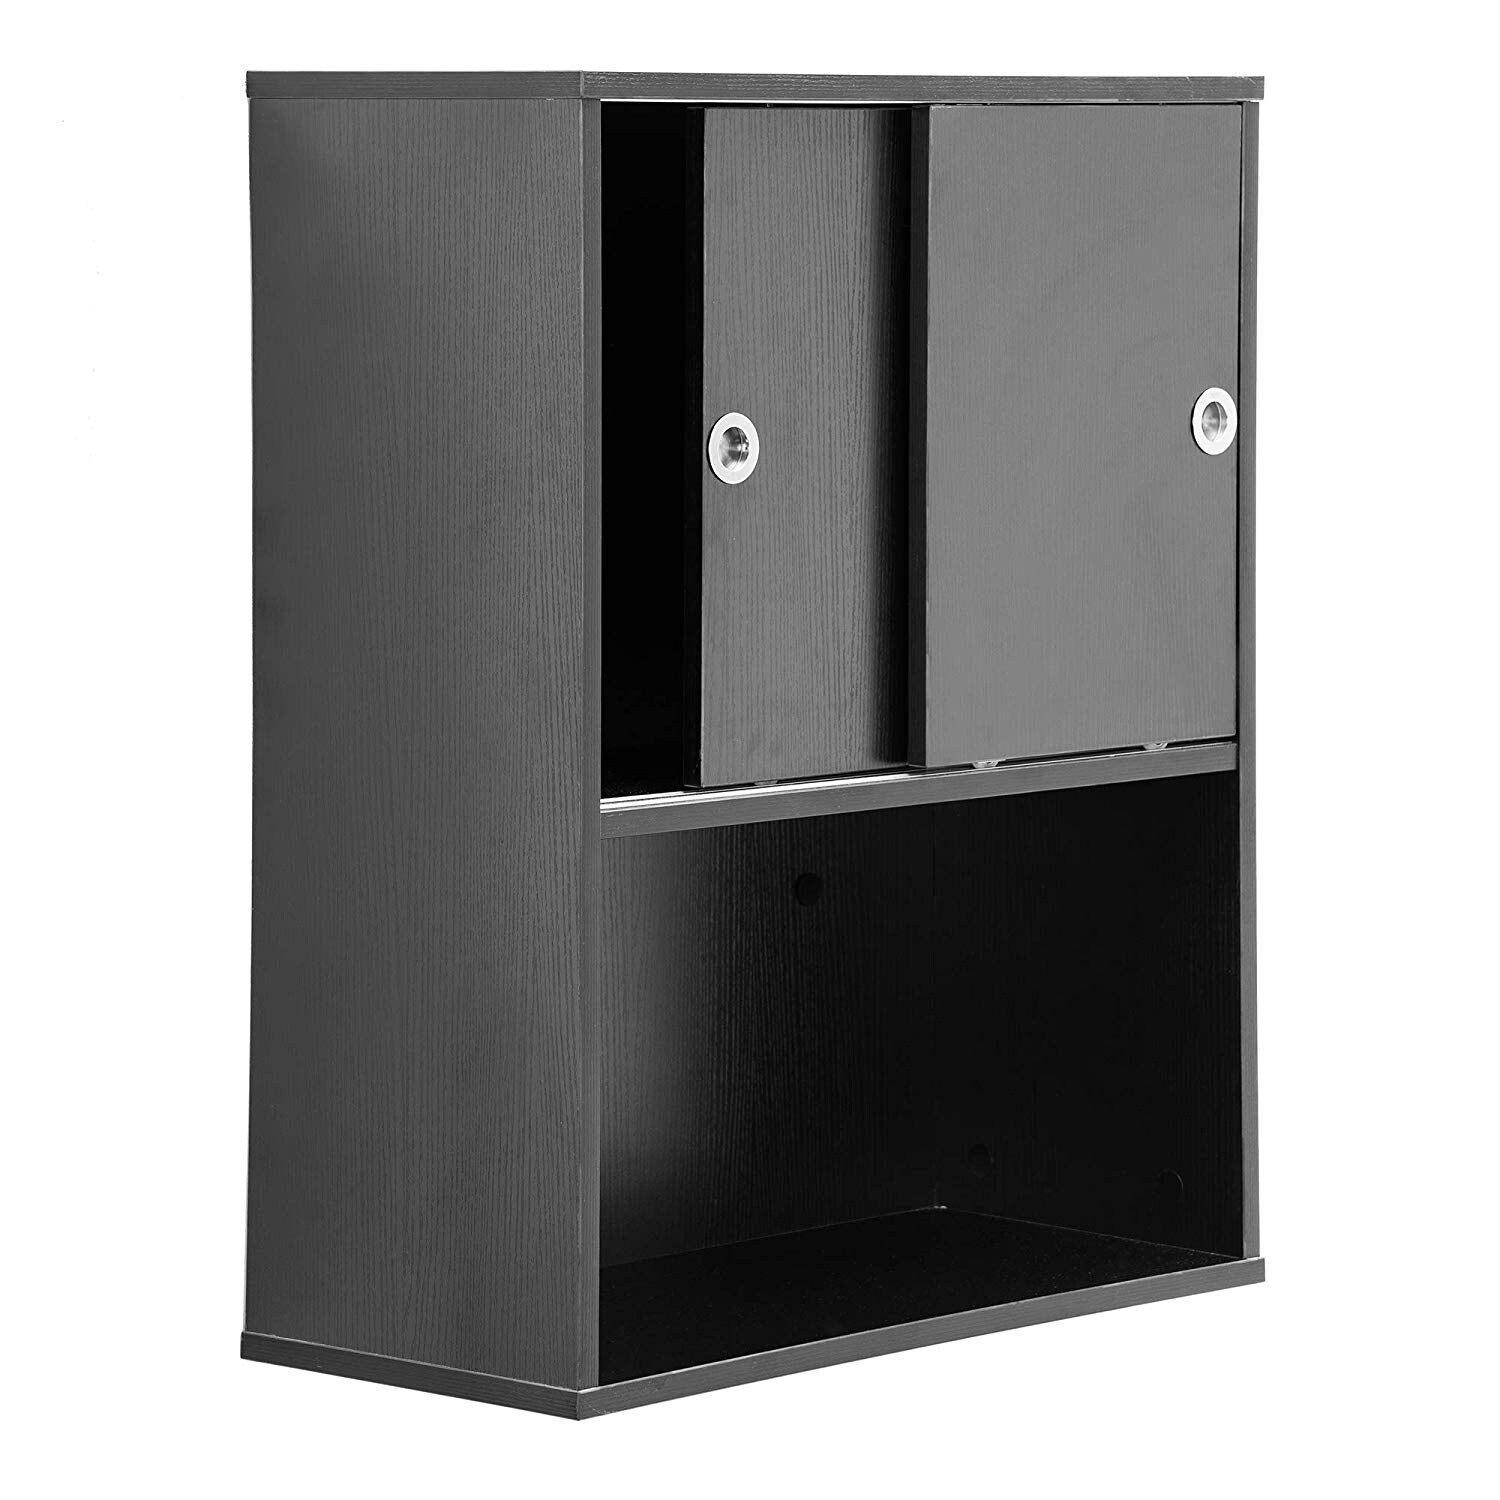 Shop Barberpub Wall Mounted Styling Station Storage Cabinet With